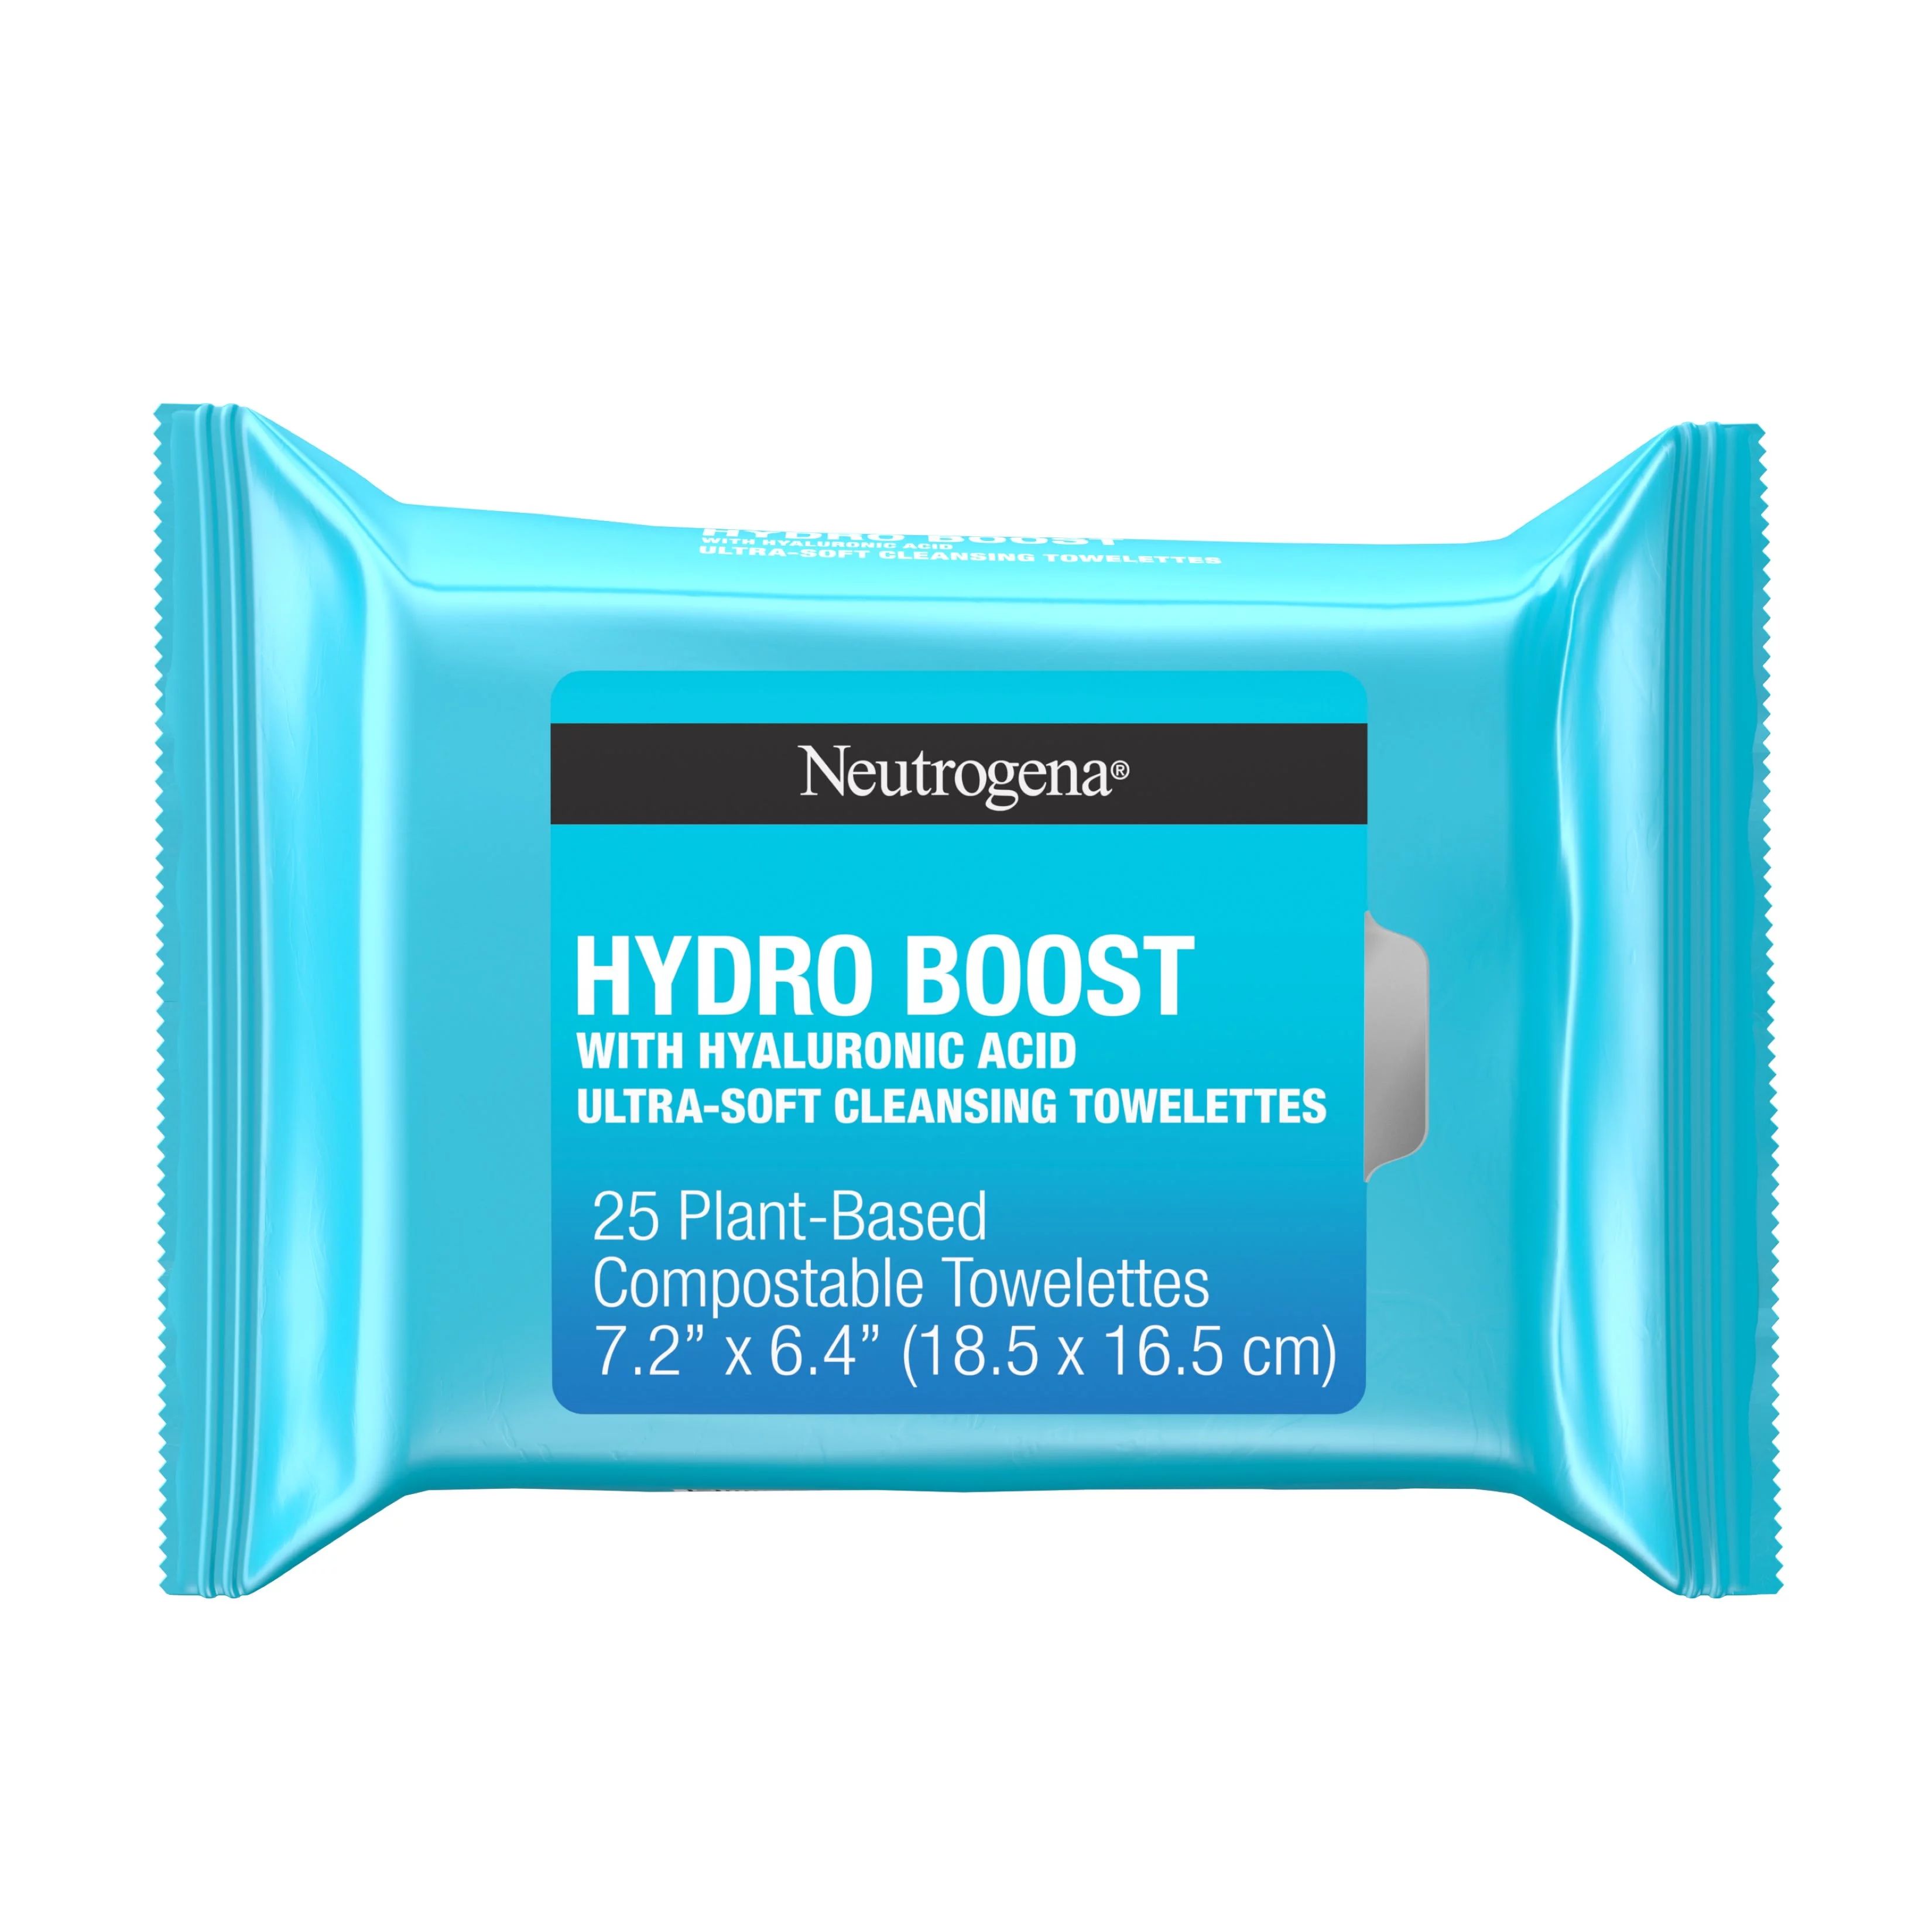 Neutrogena Hydro Boost Face Cleansing & Makeup Remover Wipes, 25 ct | Walmart (US)